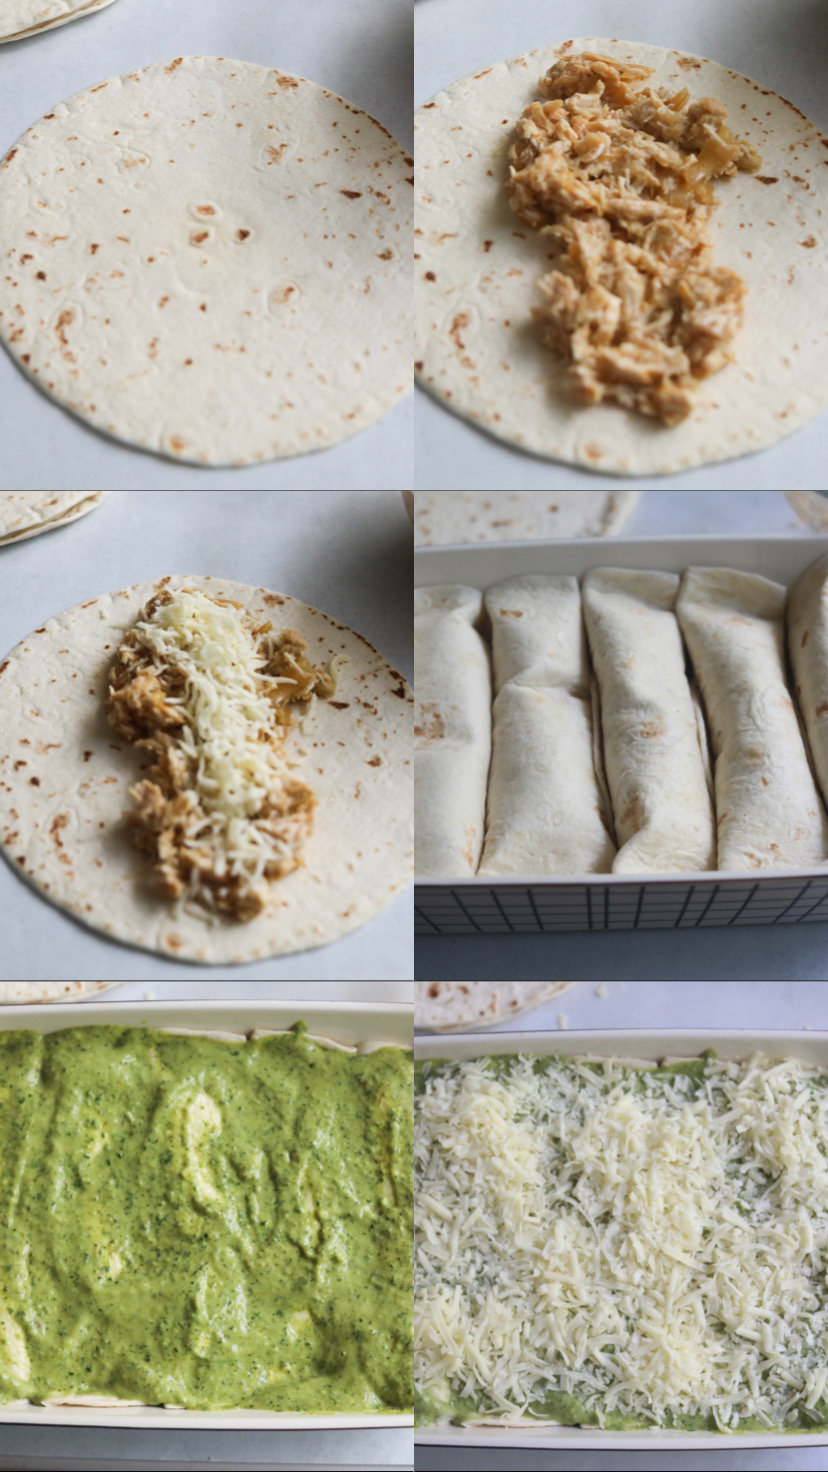 Process shot grid of chicken enchiladas with green sauce. Six images with tortilla, tortilla with shredded chicken, topped with cheese, rolled tortillas in a baking dish, topped with green sauce and topped with cheese ready for baking.